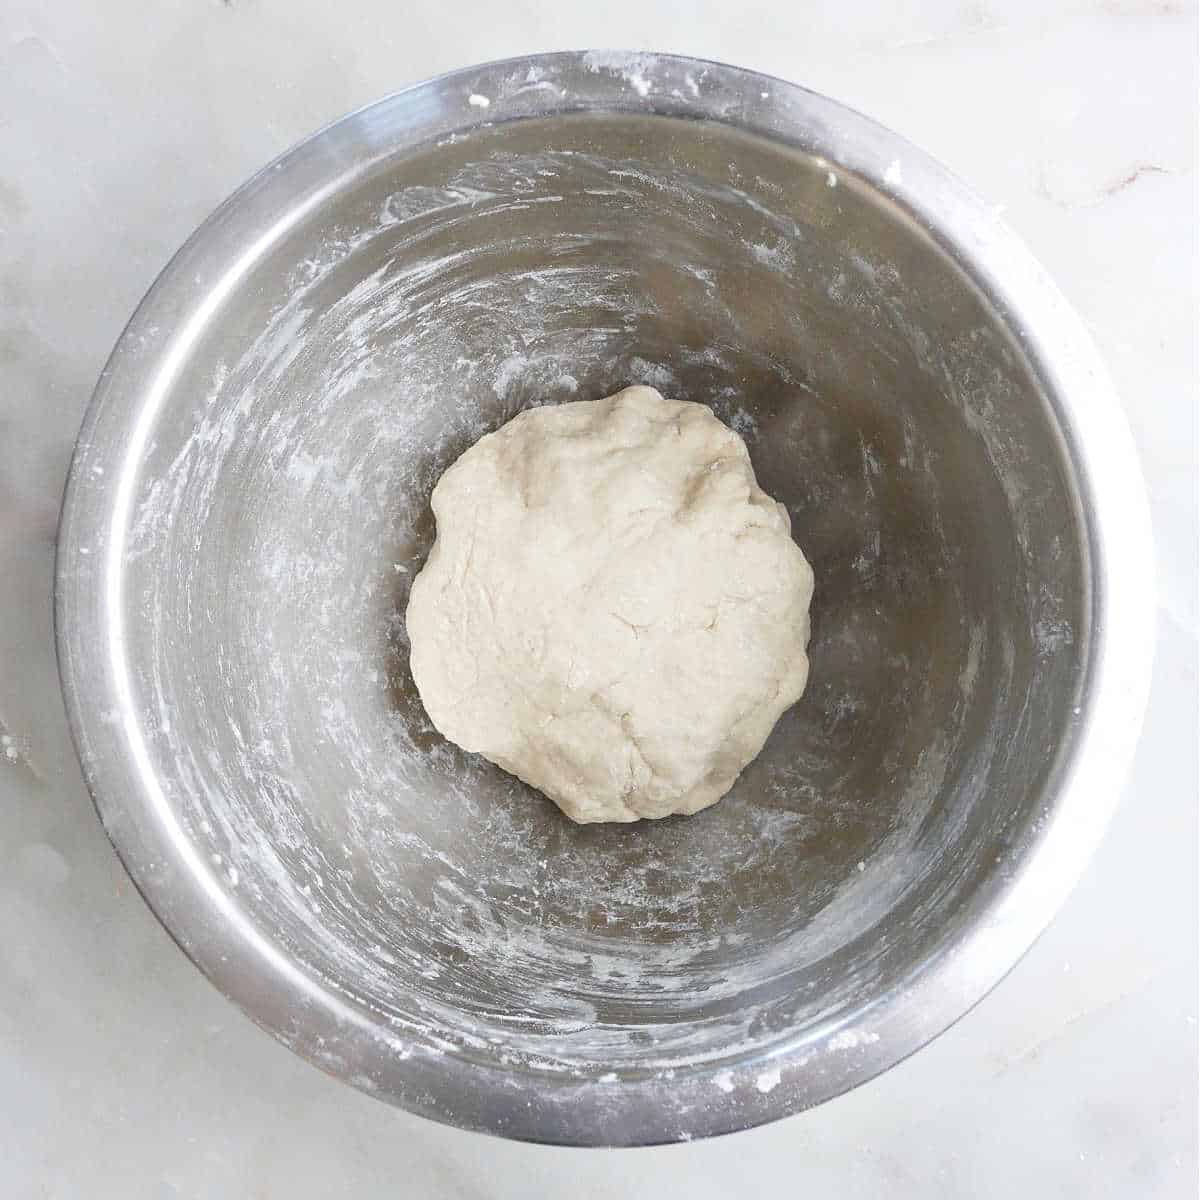 a ball of dough for leek pancakes in a mixing bowl